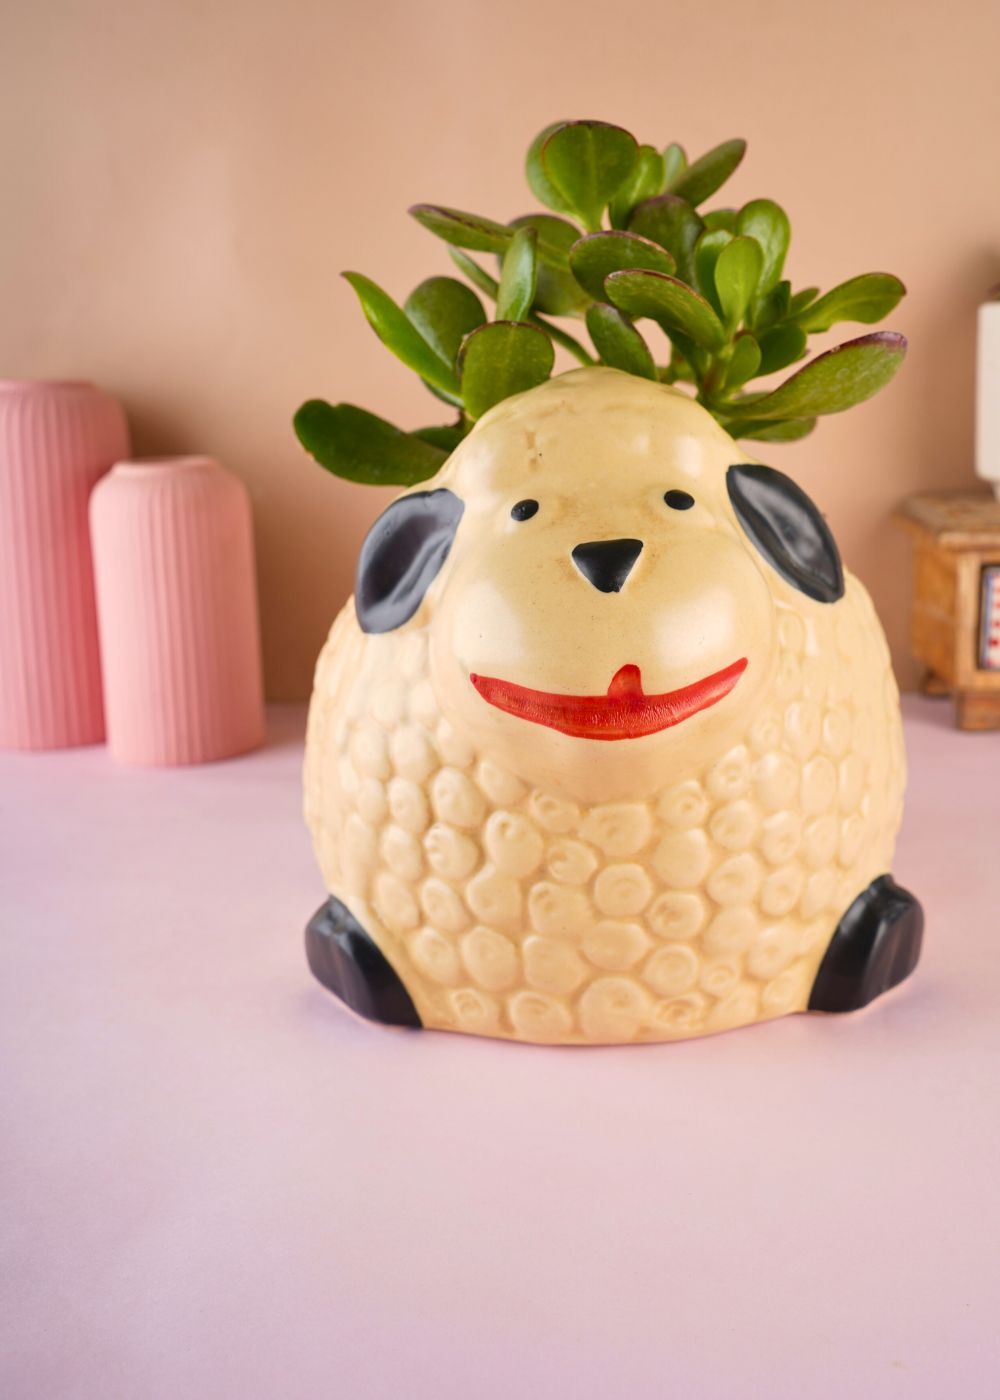 sheep planter for your beautiful plants